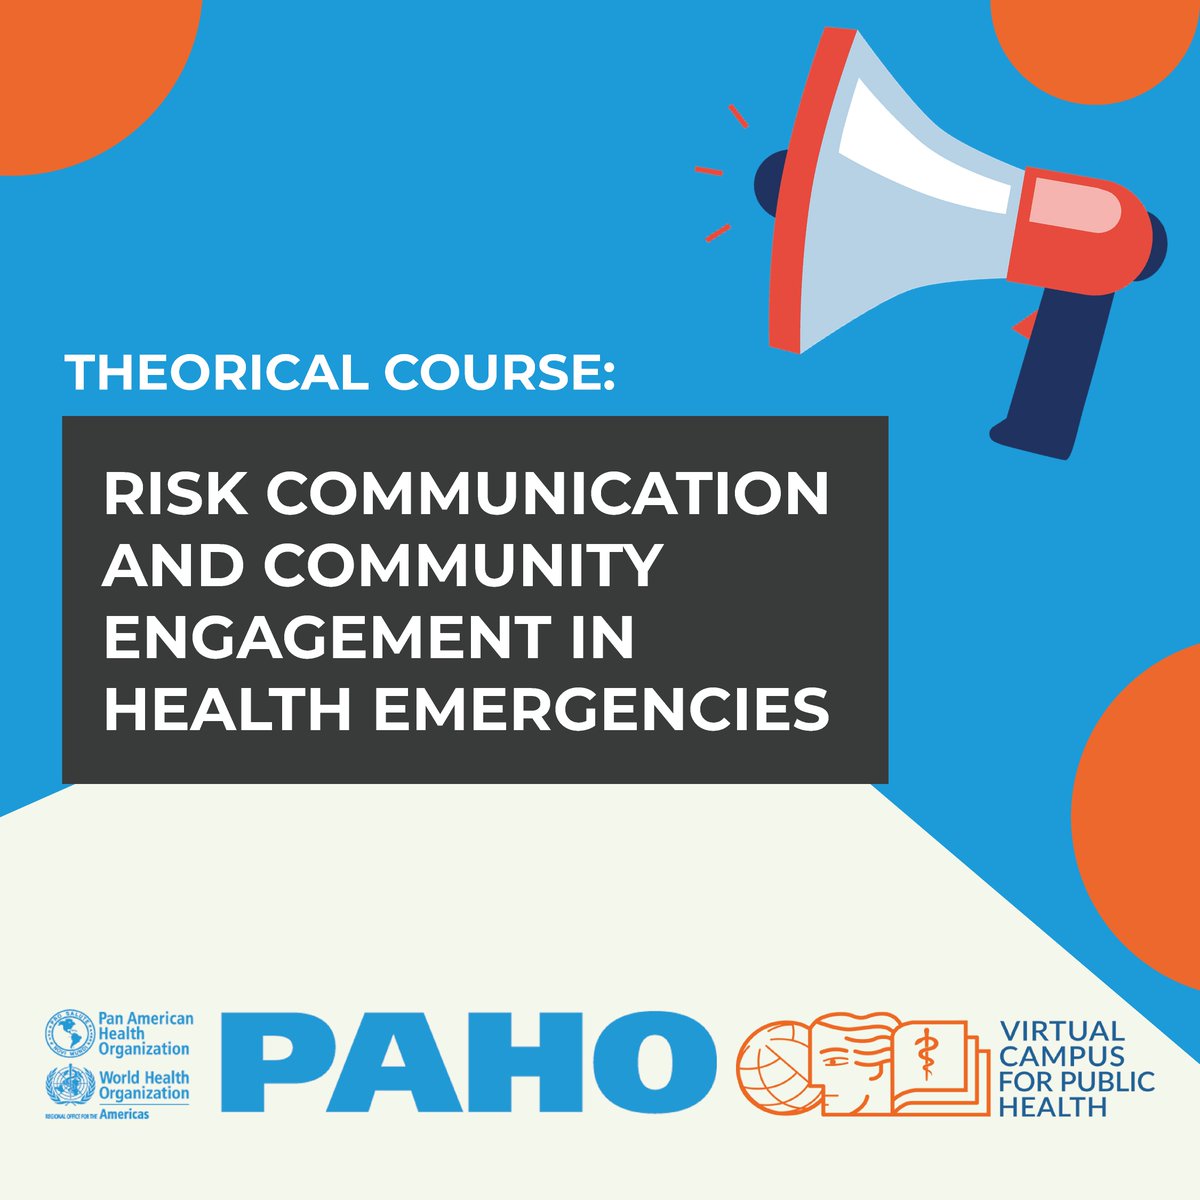 📌𝗡𝗼𝘄 𝗮𝘃𝗮𝗶𝗹𝗮𝗯𝗹𝗲 𝗶𝗻 𝗘𝗻𝗴𝗹𝗶𝘀𝗵! This self-paced course lays the groundwork for understanding the importance of risk communication in responding to health emergencies by applying strategies that empower communities. Register: campus.paho.org/en/course/risk…